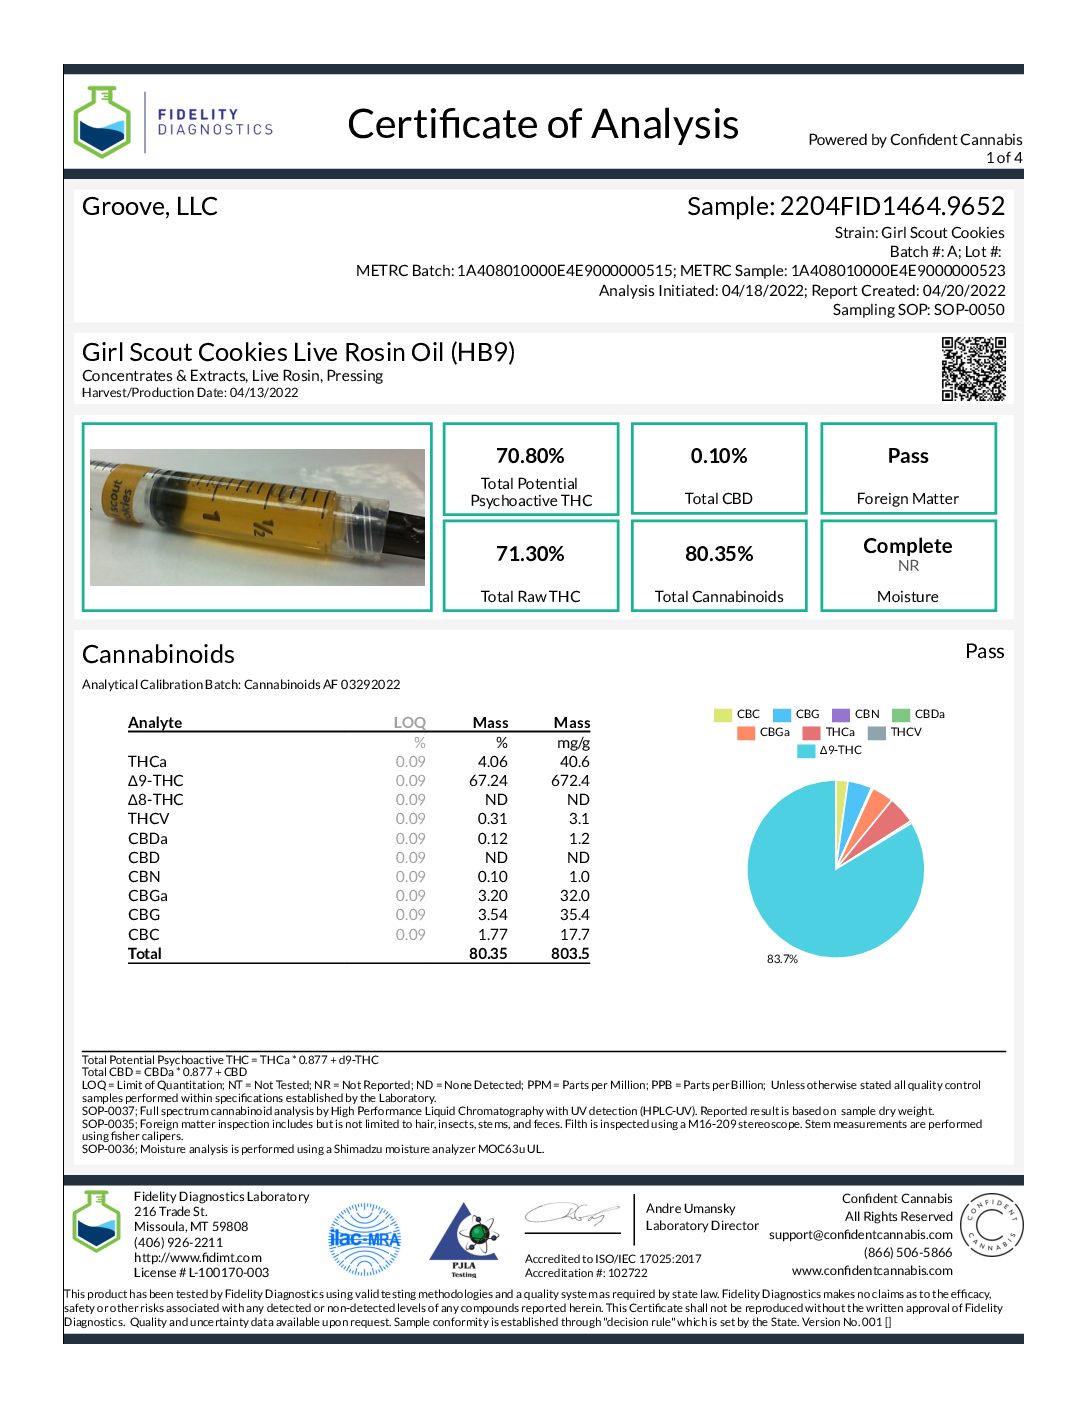 https://groovesolventless.com/wp-content/uploads/2022/04/Girl-Scout-Cookies-Live-Rosin-Oil-HB9-pdf.jpg